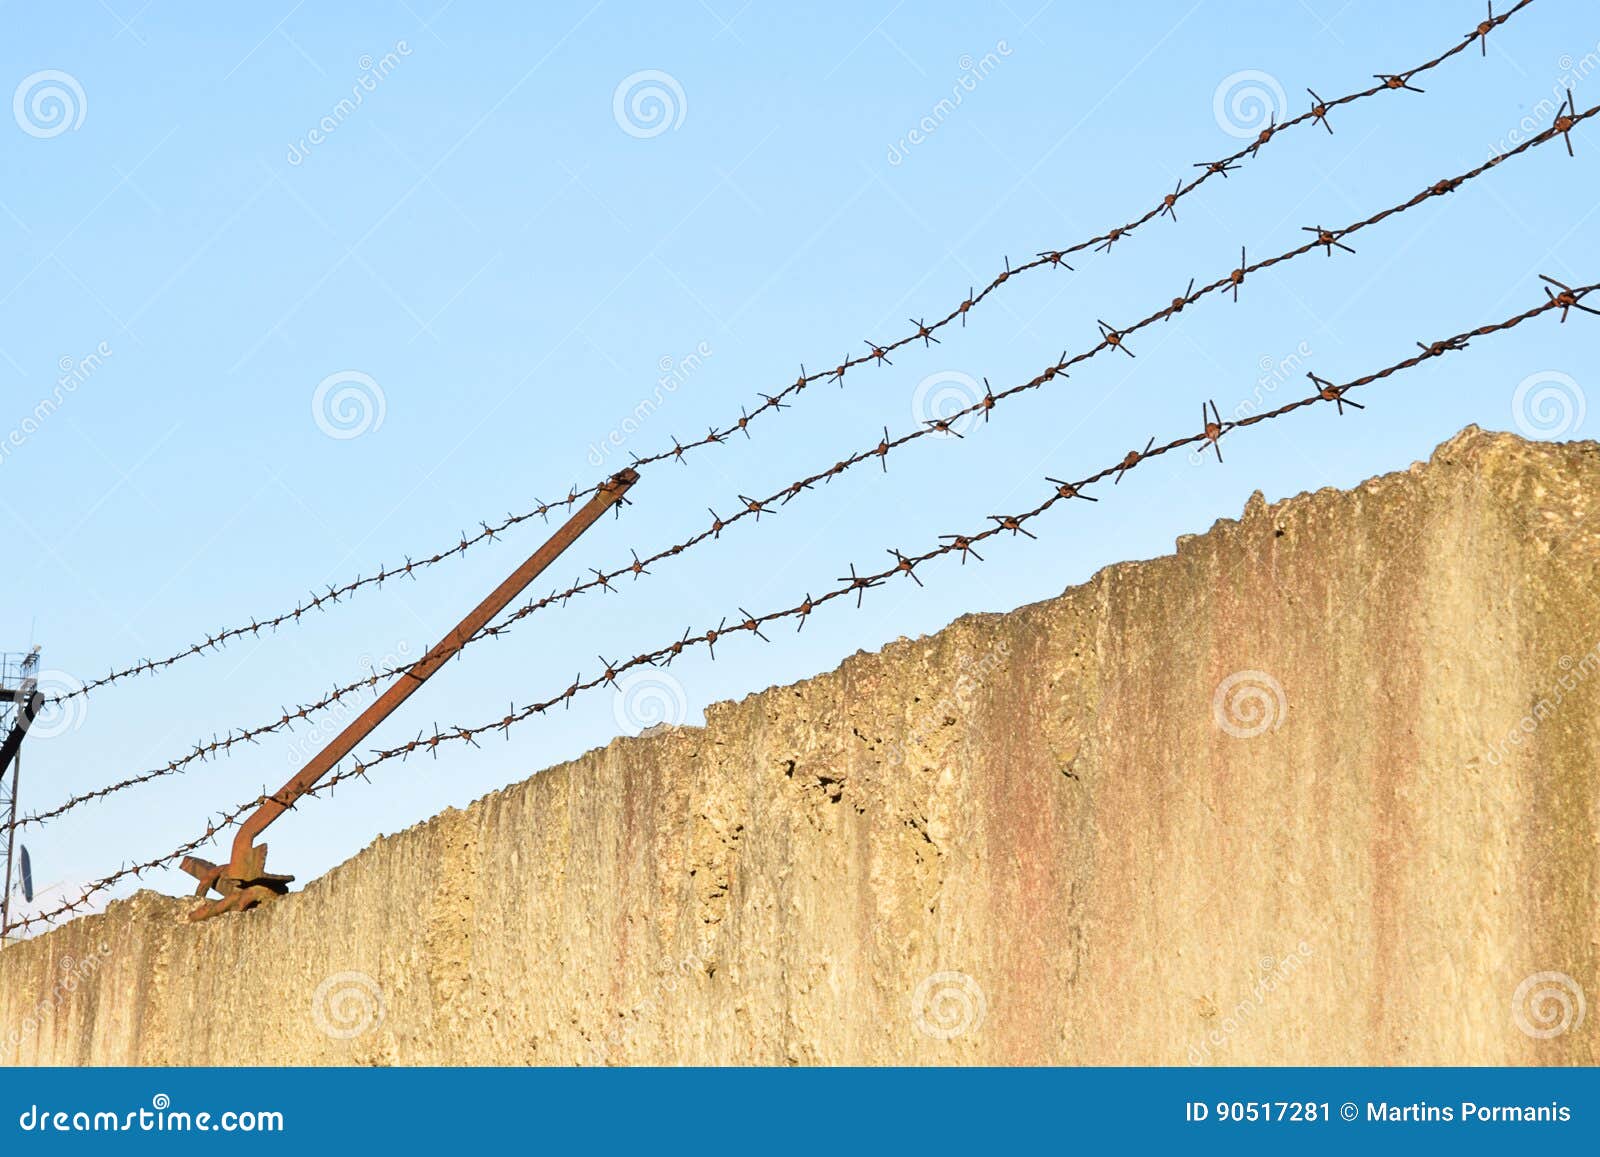 safety fence of barbed wire